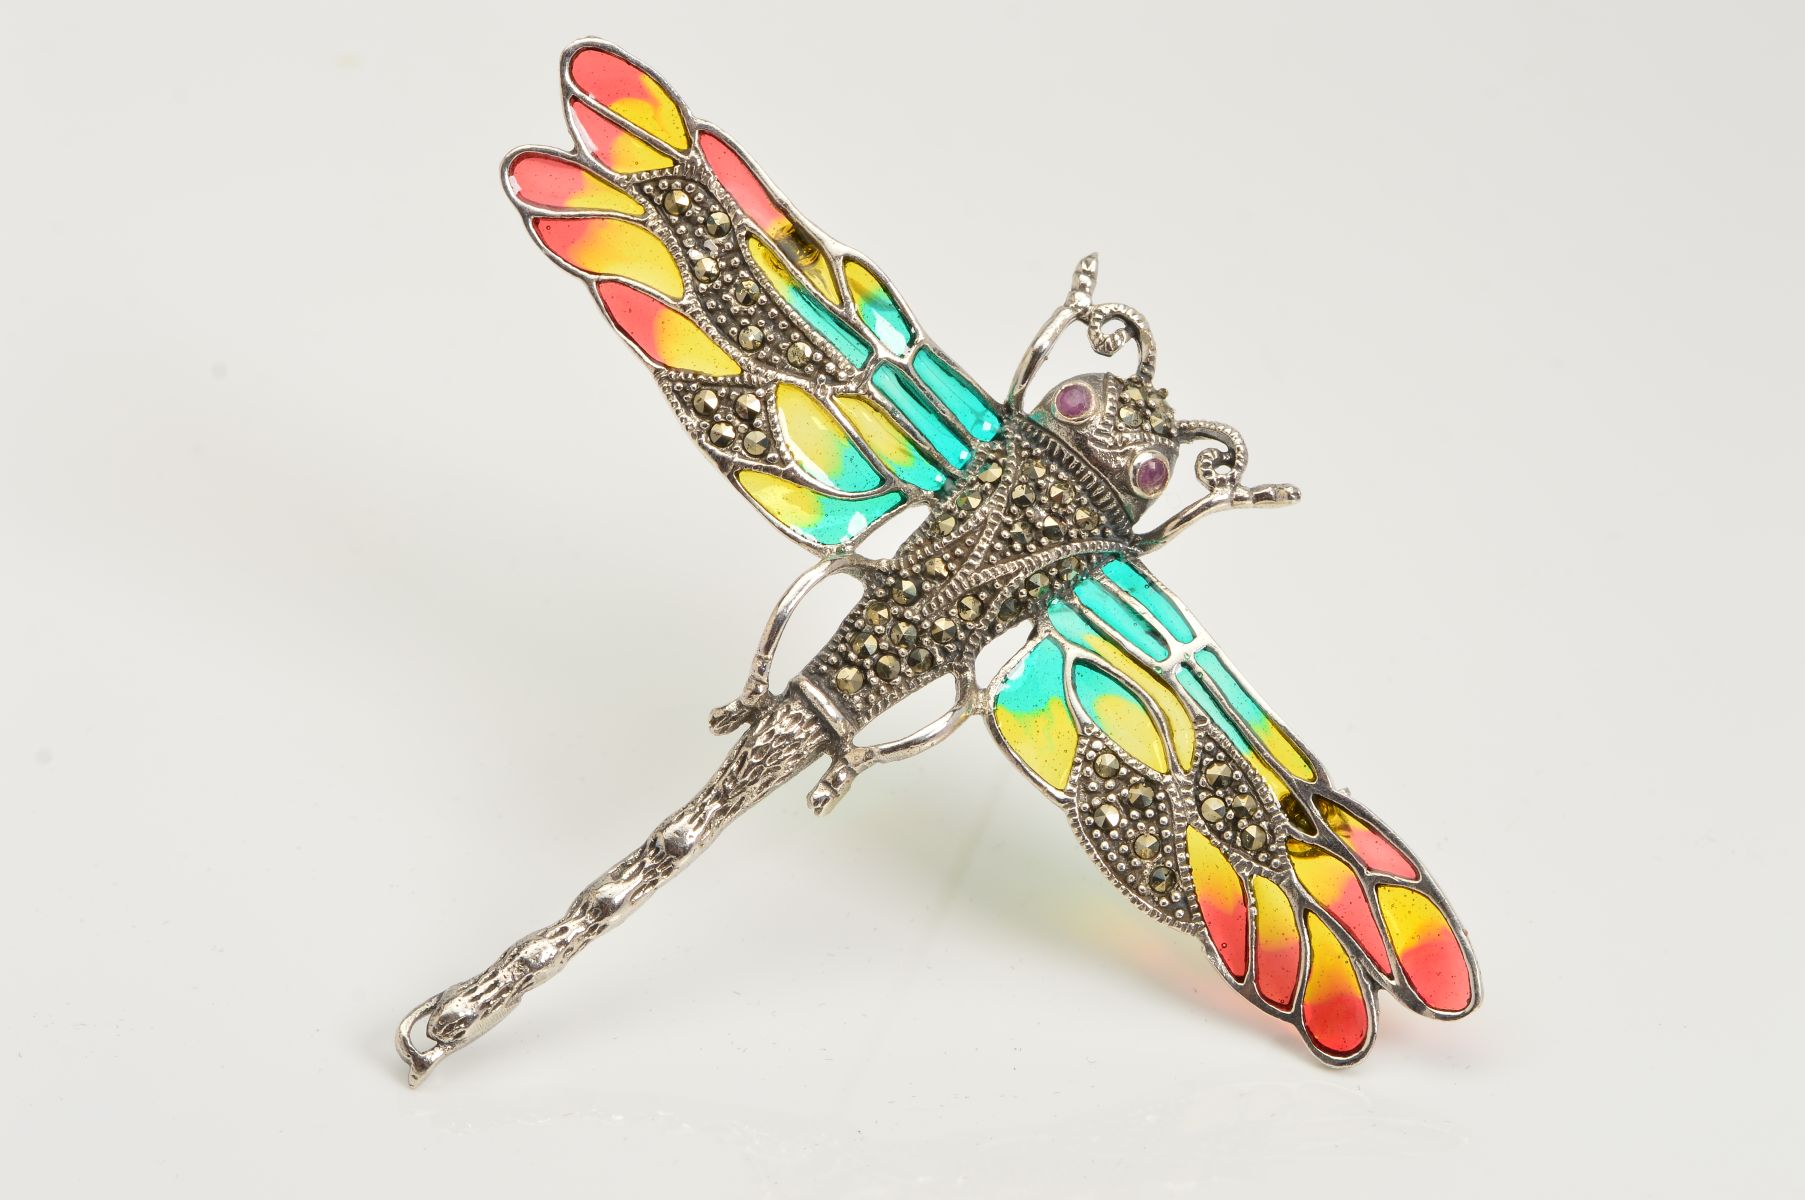 A PLIQUE-A-JOUR DRAGONFLY BROOCH, designed as green, yellow and red plique-a-jour wings with